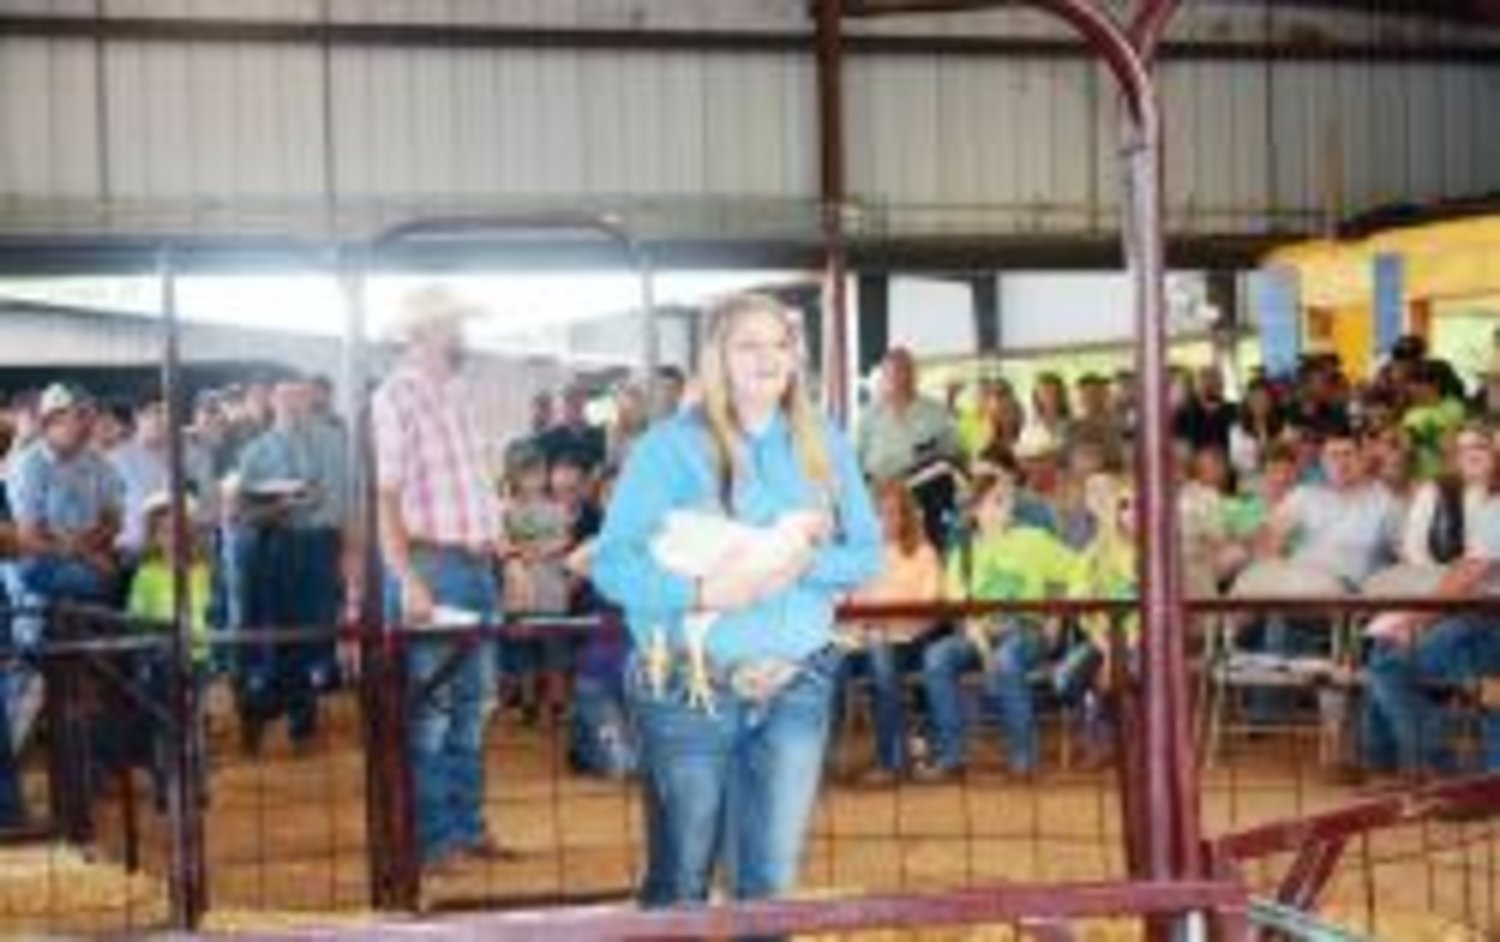 The Grand Champion Broiler went to Graceann Mullins of the Alba-Golden FFA at the livestock show Saturday.